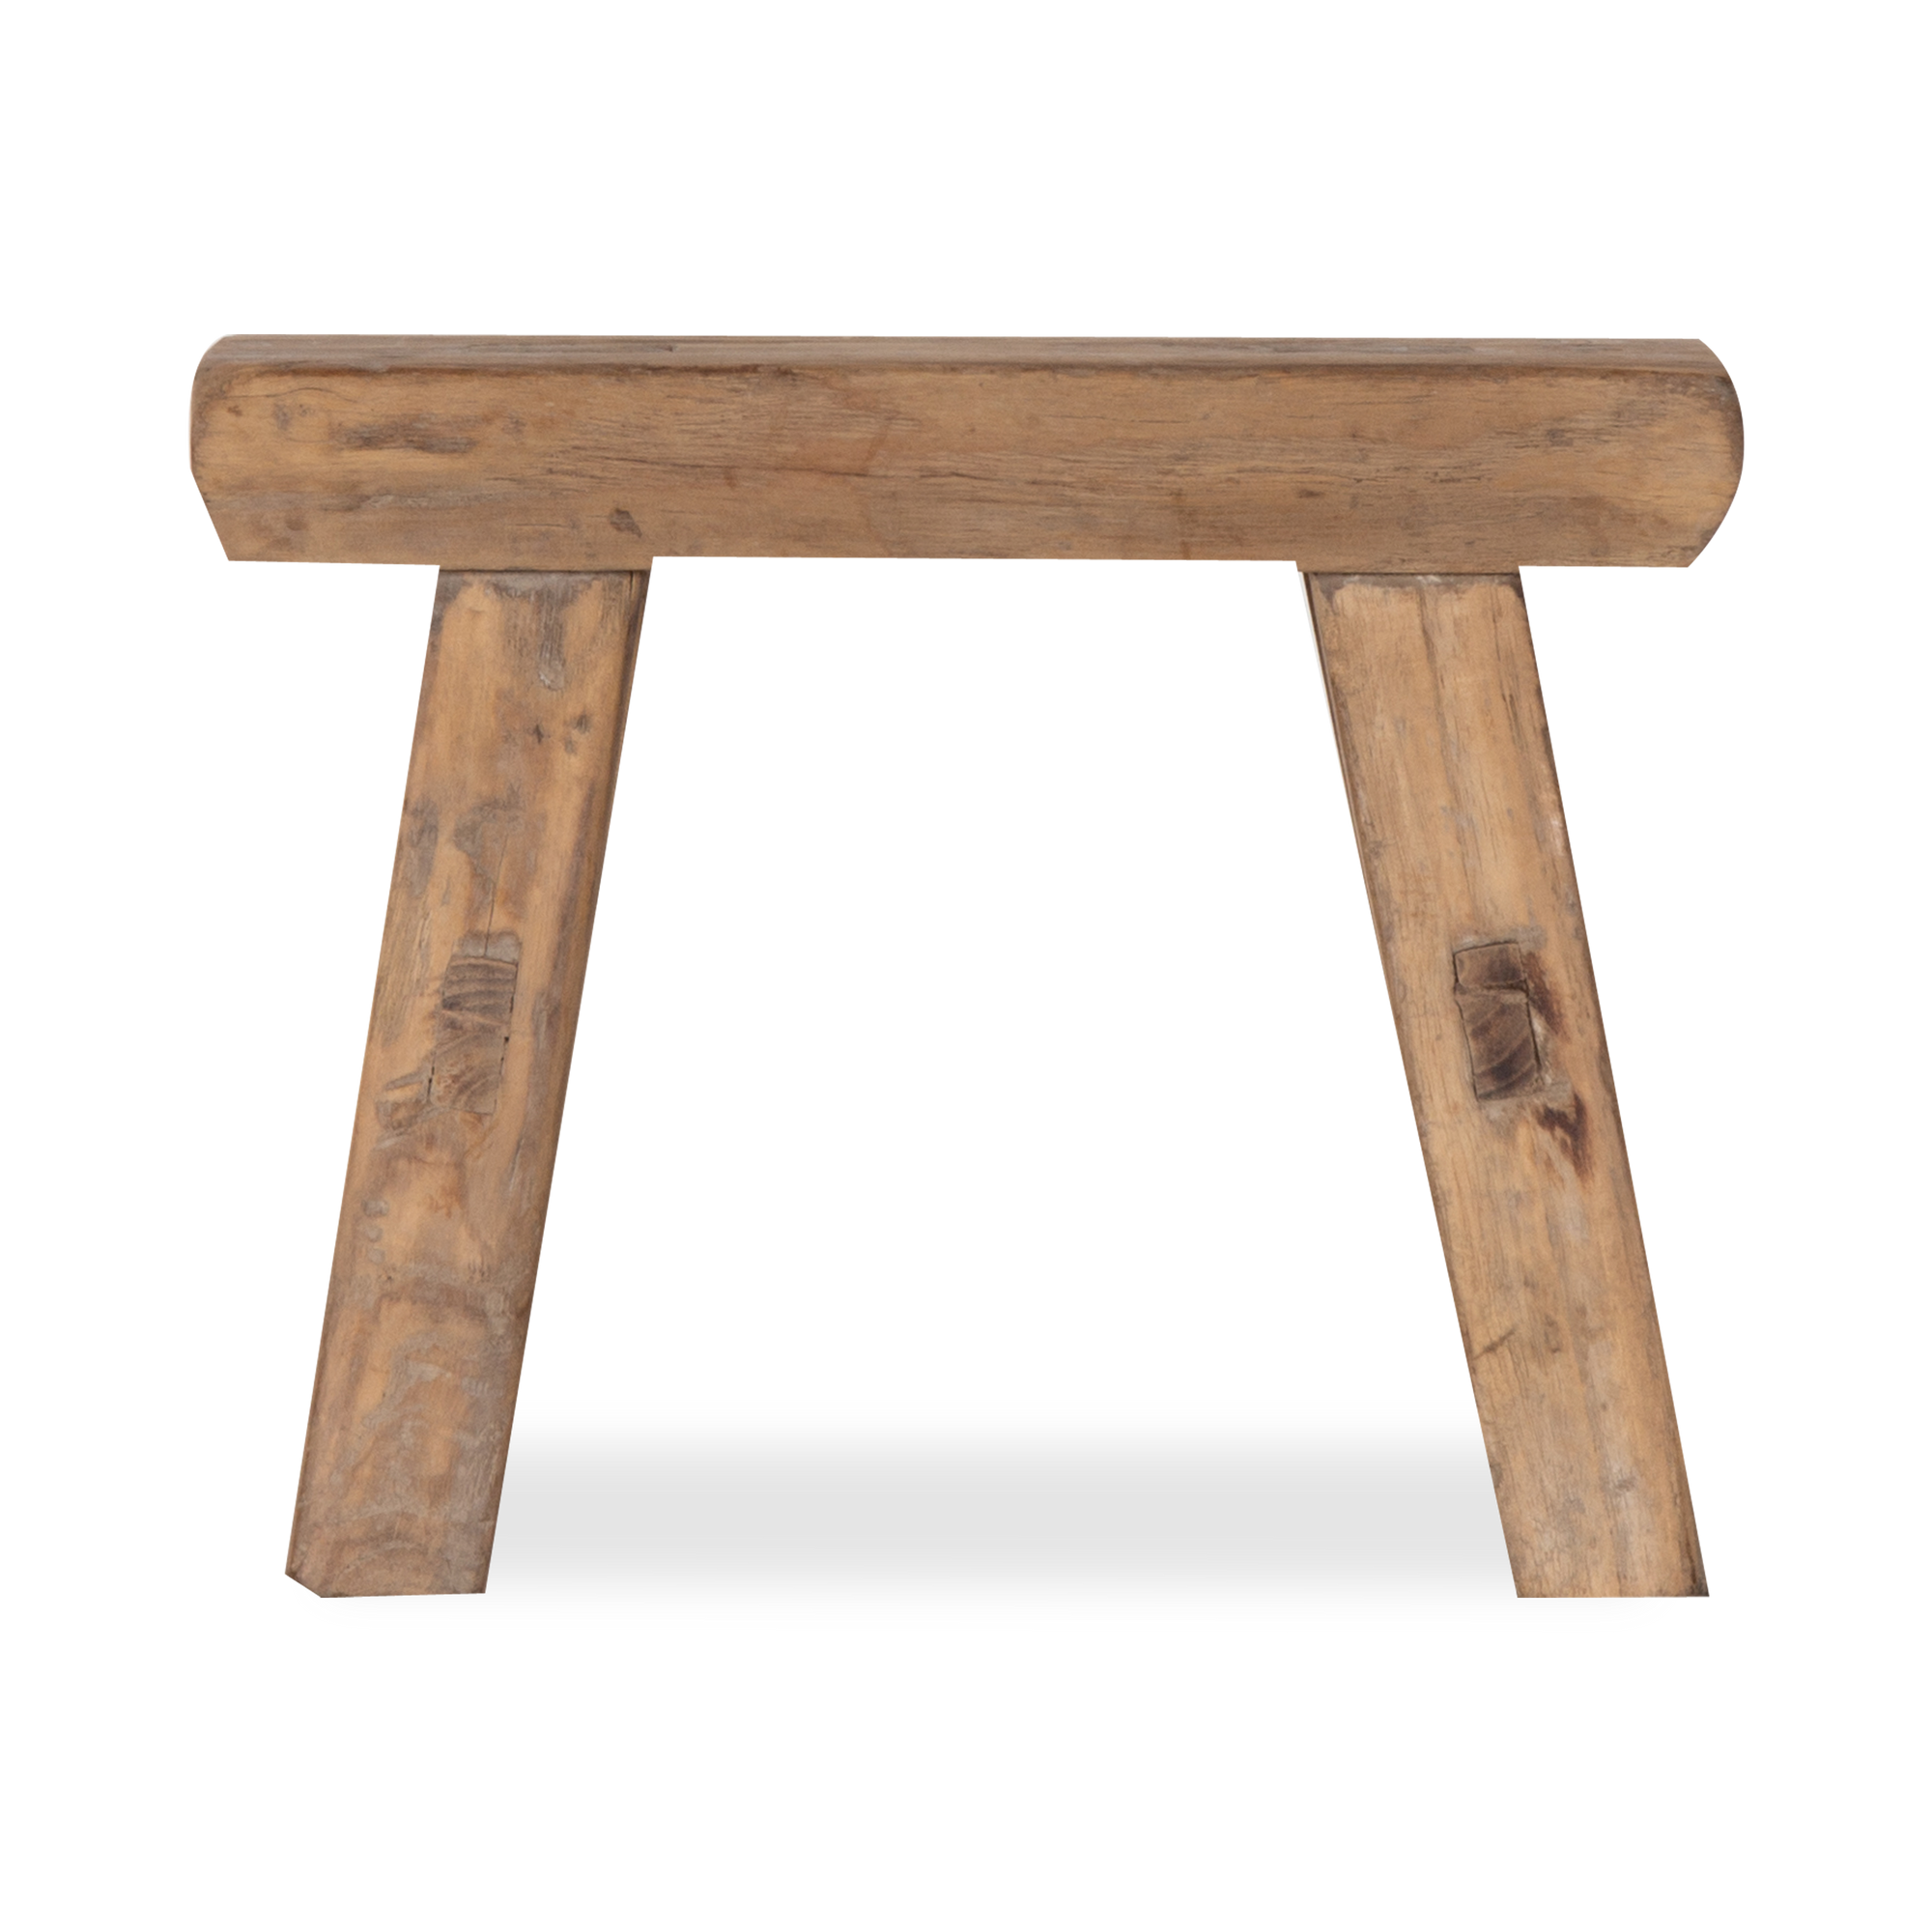 Rustic and unique, the Vintage Wood Riser will add warmth and an organic appeal to your space.